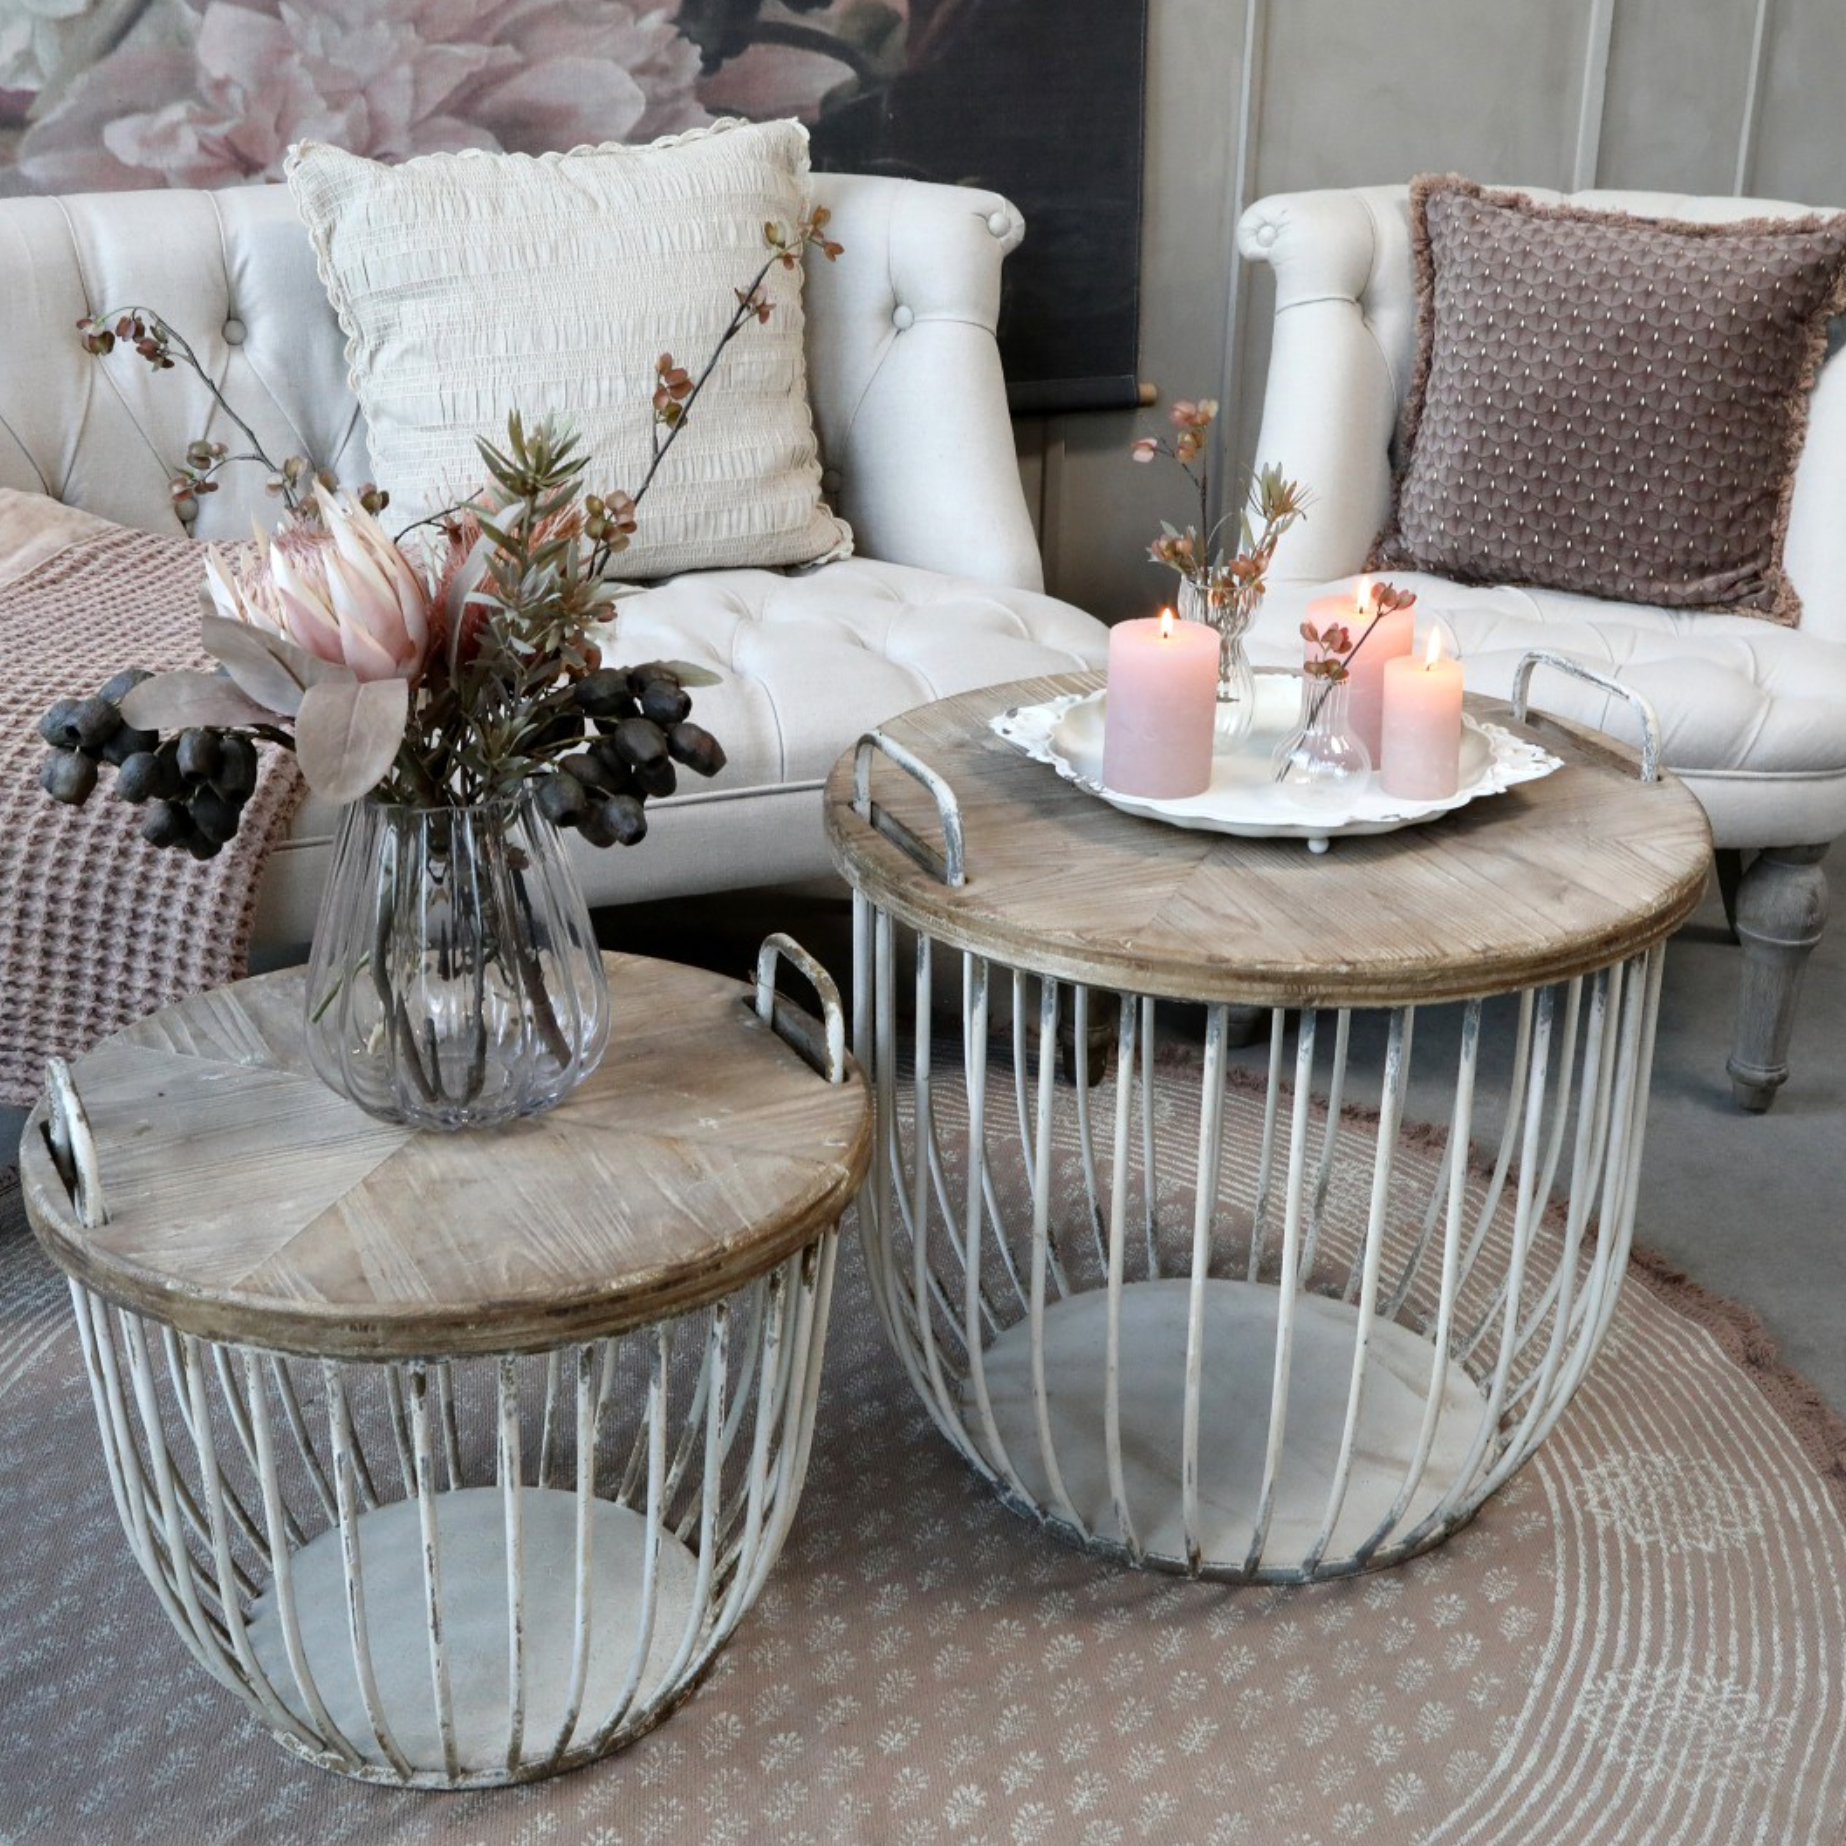 rustic coffee tables set with pink decor items,